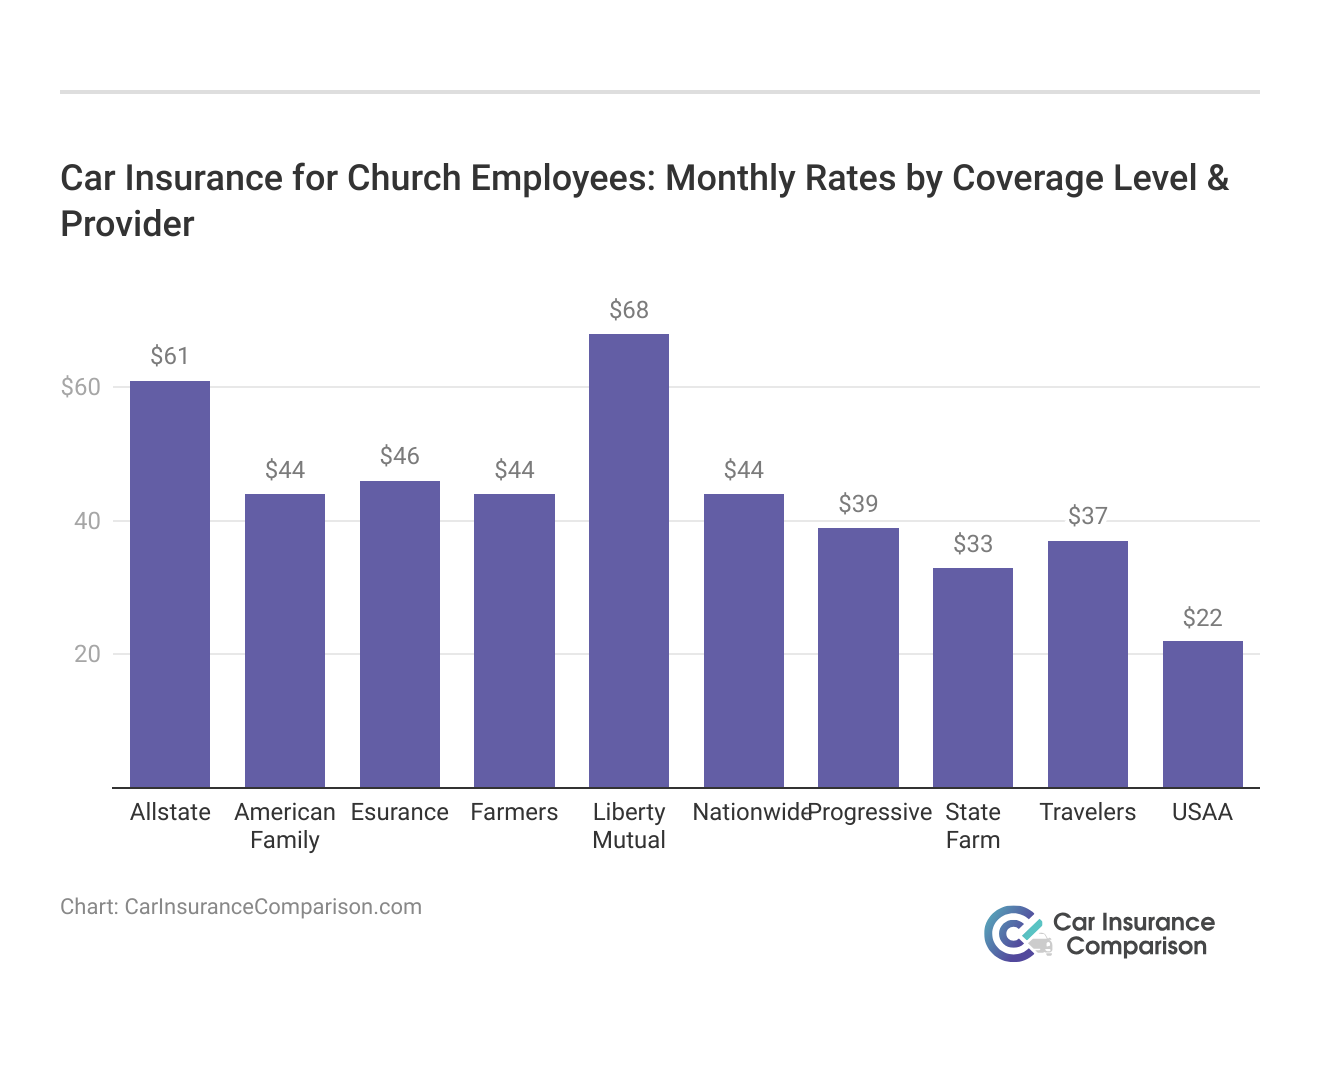 <h3>Car Insurance for Church Employees: Monthly Rates by Coverage Level & Provider</h3>